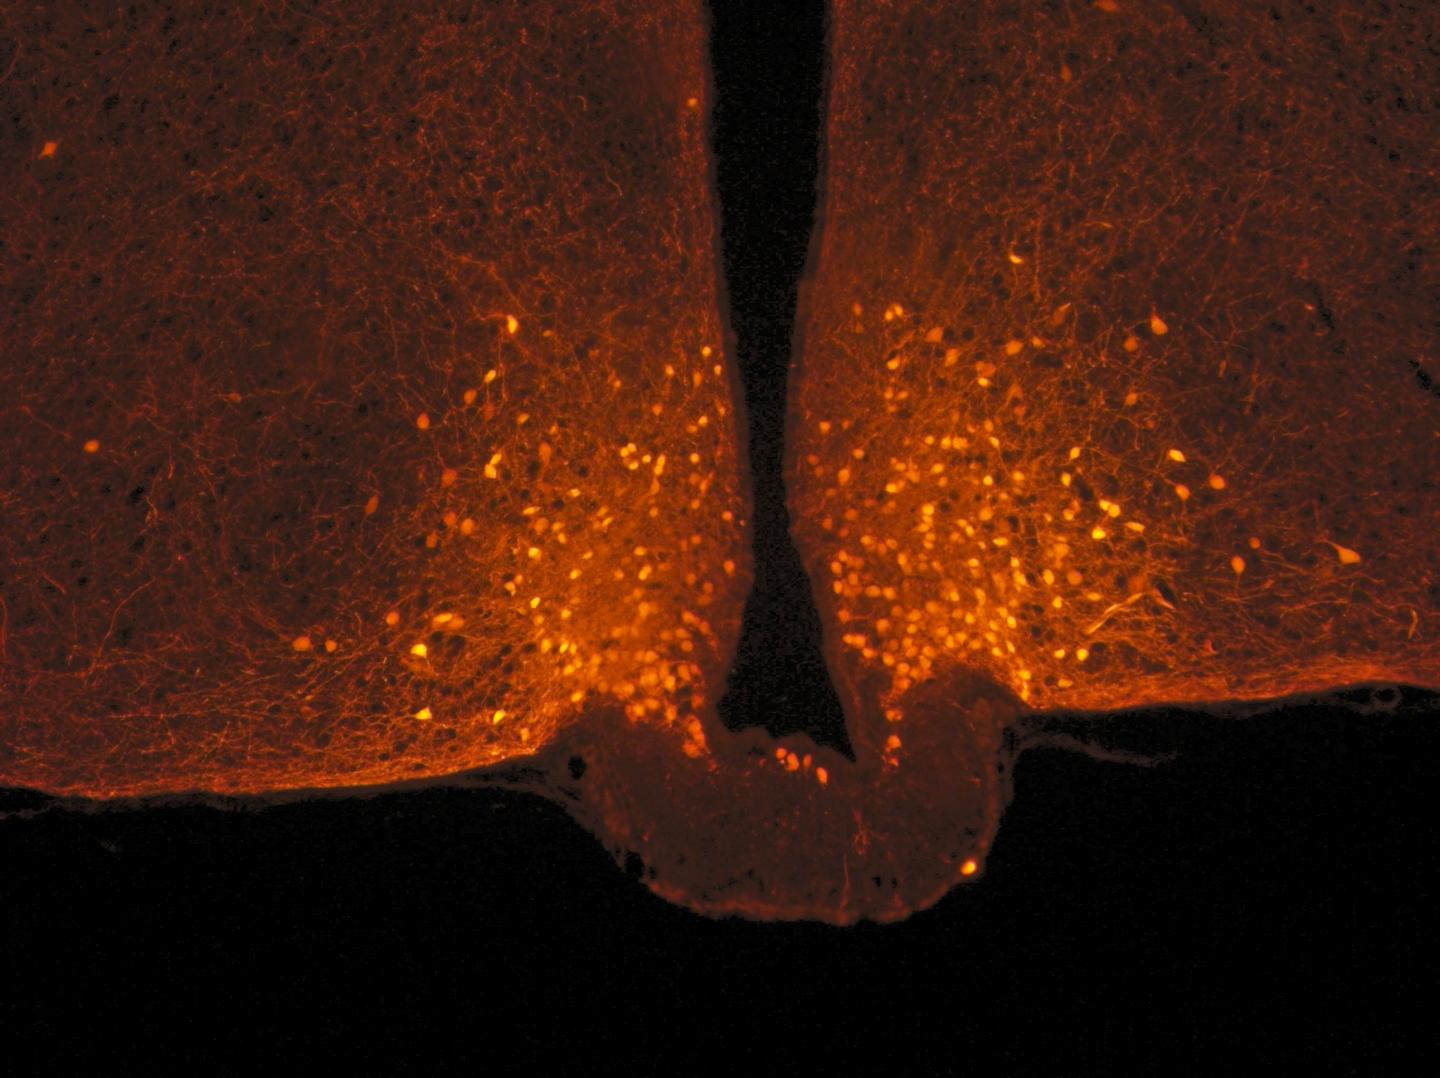 POMC Neurons (Orange Dots) in the Hypothalamus of a Mouse